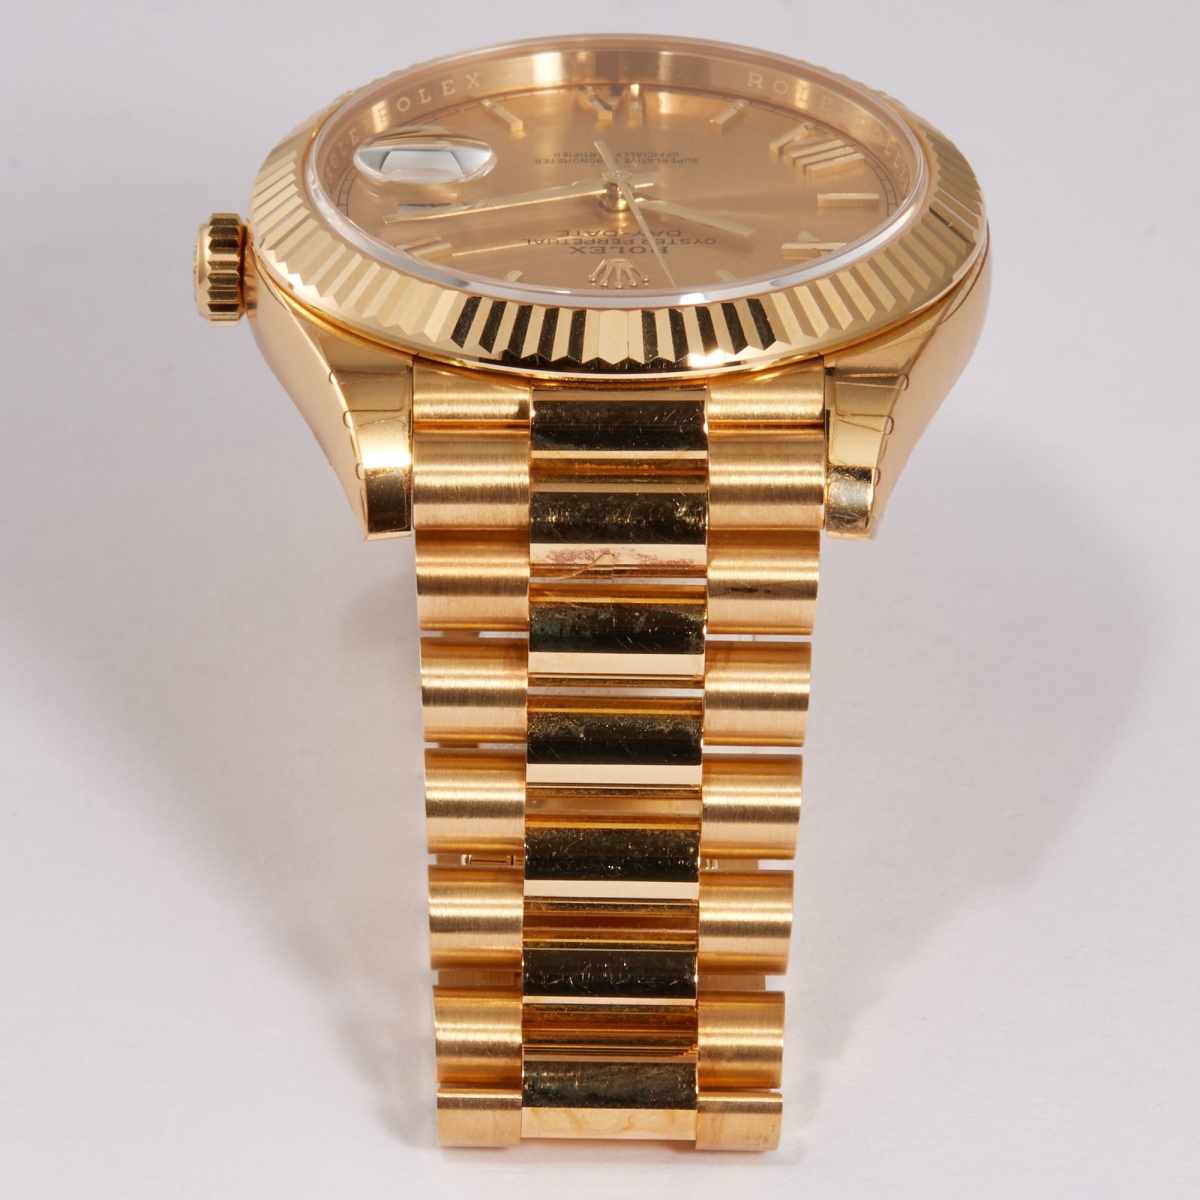 Day-Date 40 Yellow Gold Champagne Dial